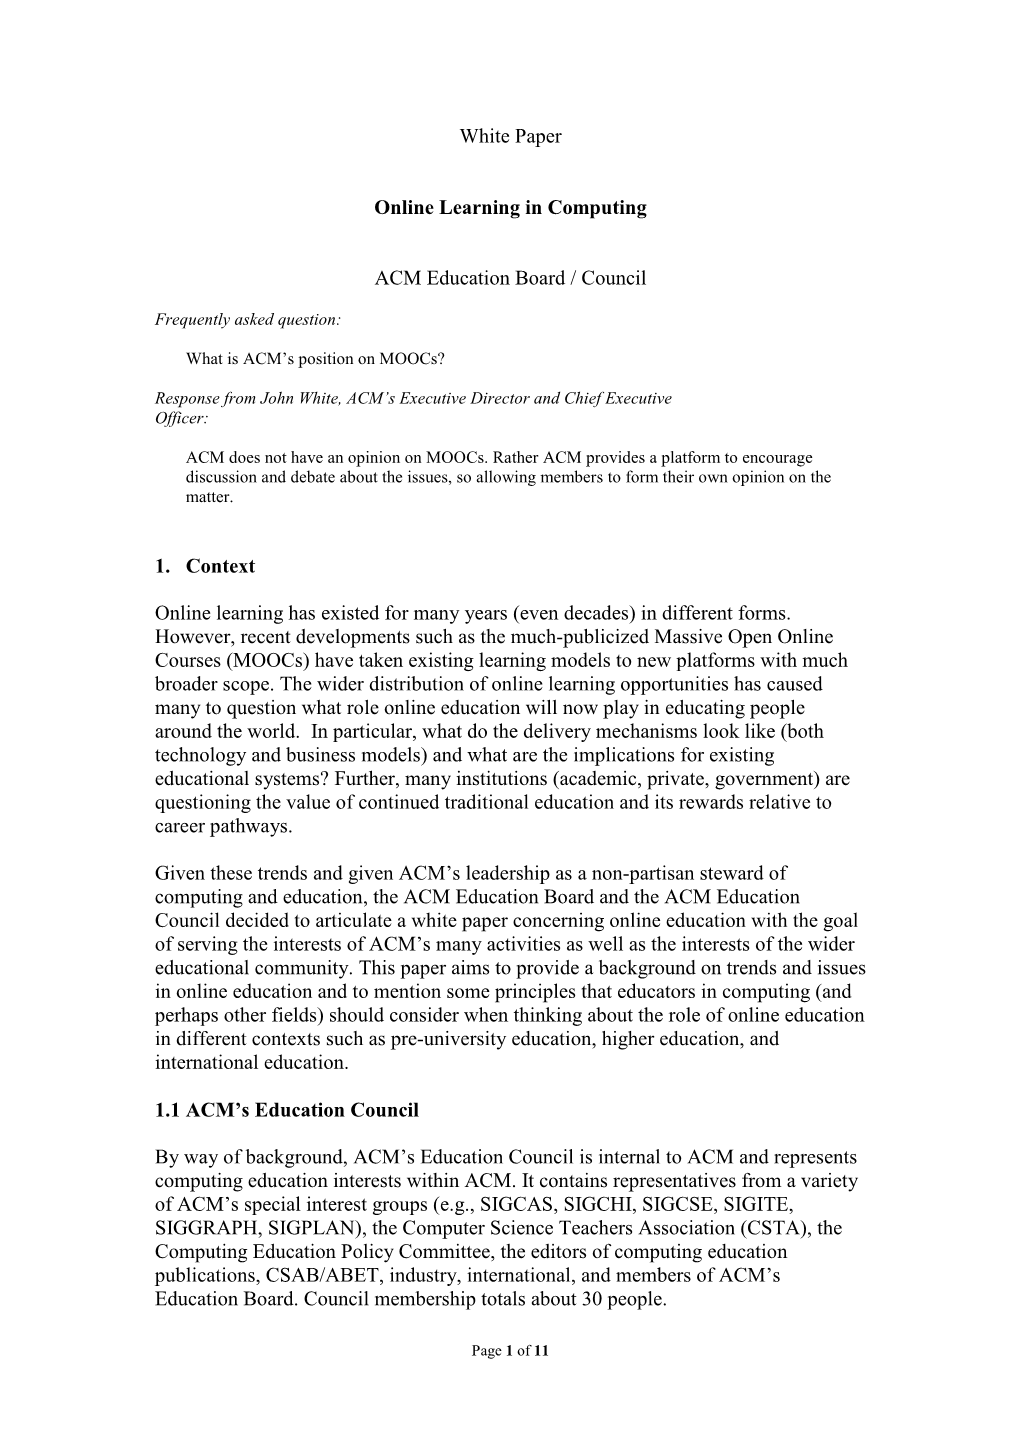 White Paper Online Learning in Computing ACM Education Board